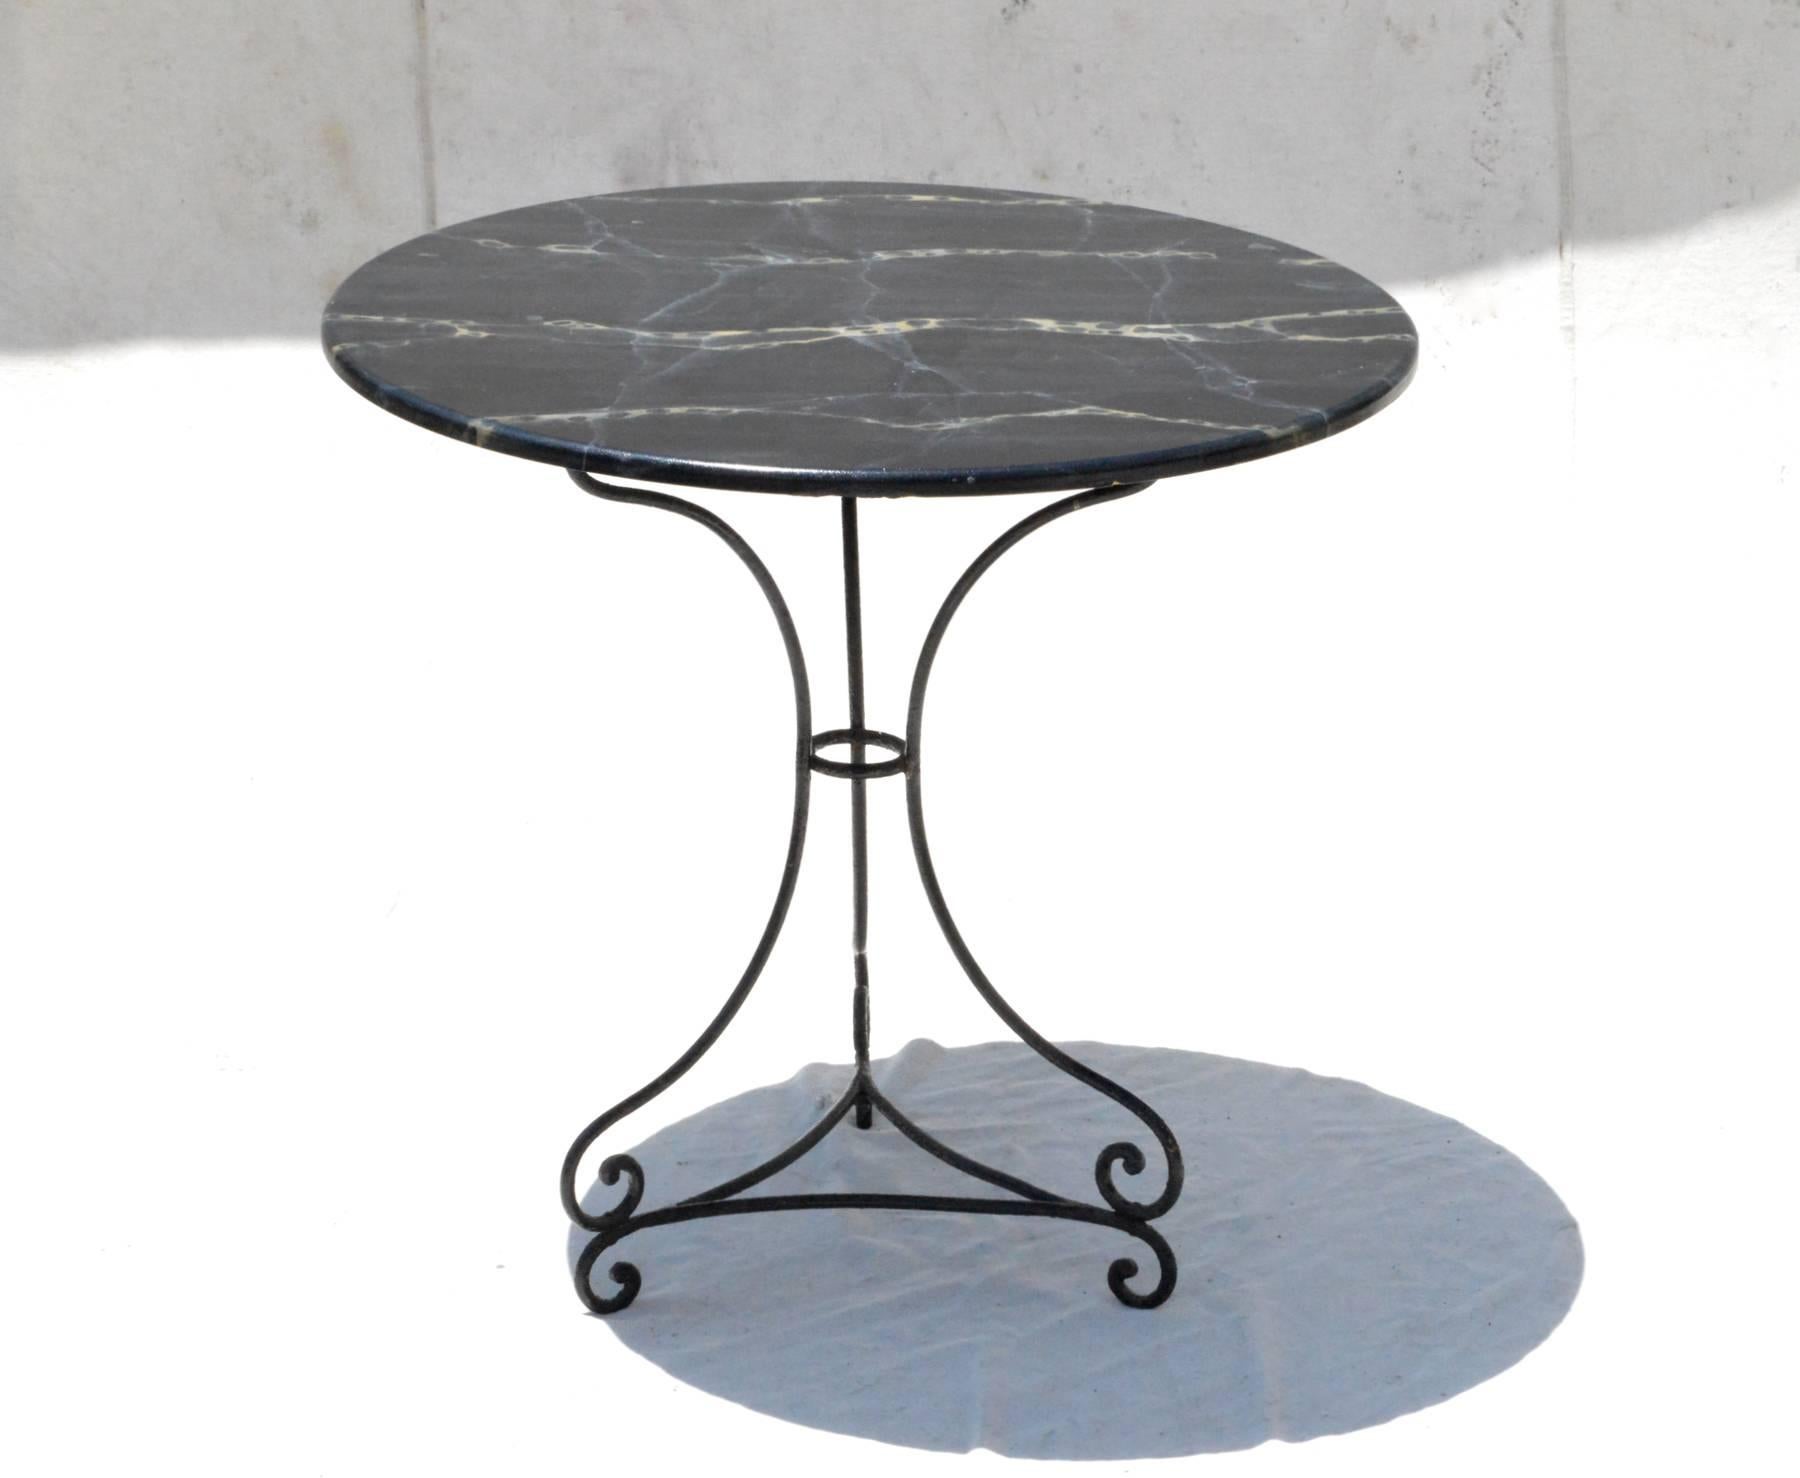 Fantastic round bistro table having faux marble wood top resting on a hand-wrought iron tripod base. Bring Classic garden looks inside as a small breakfast nook table or use as a center table within a smaller interior. 

 